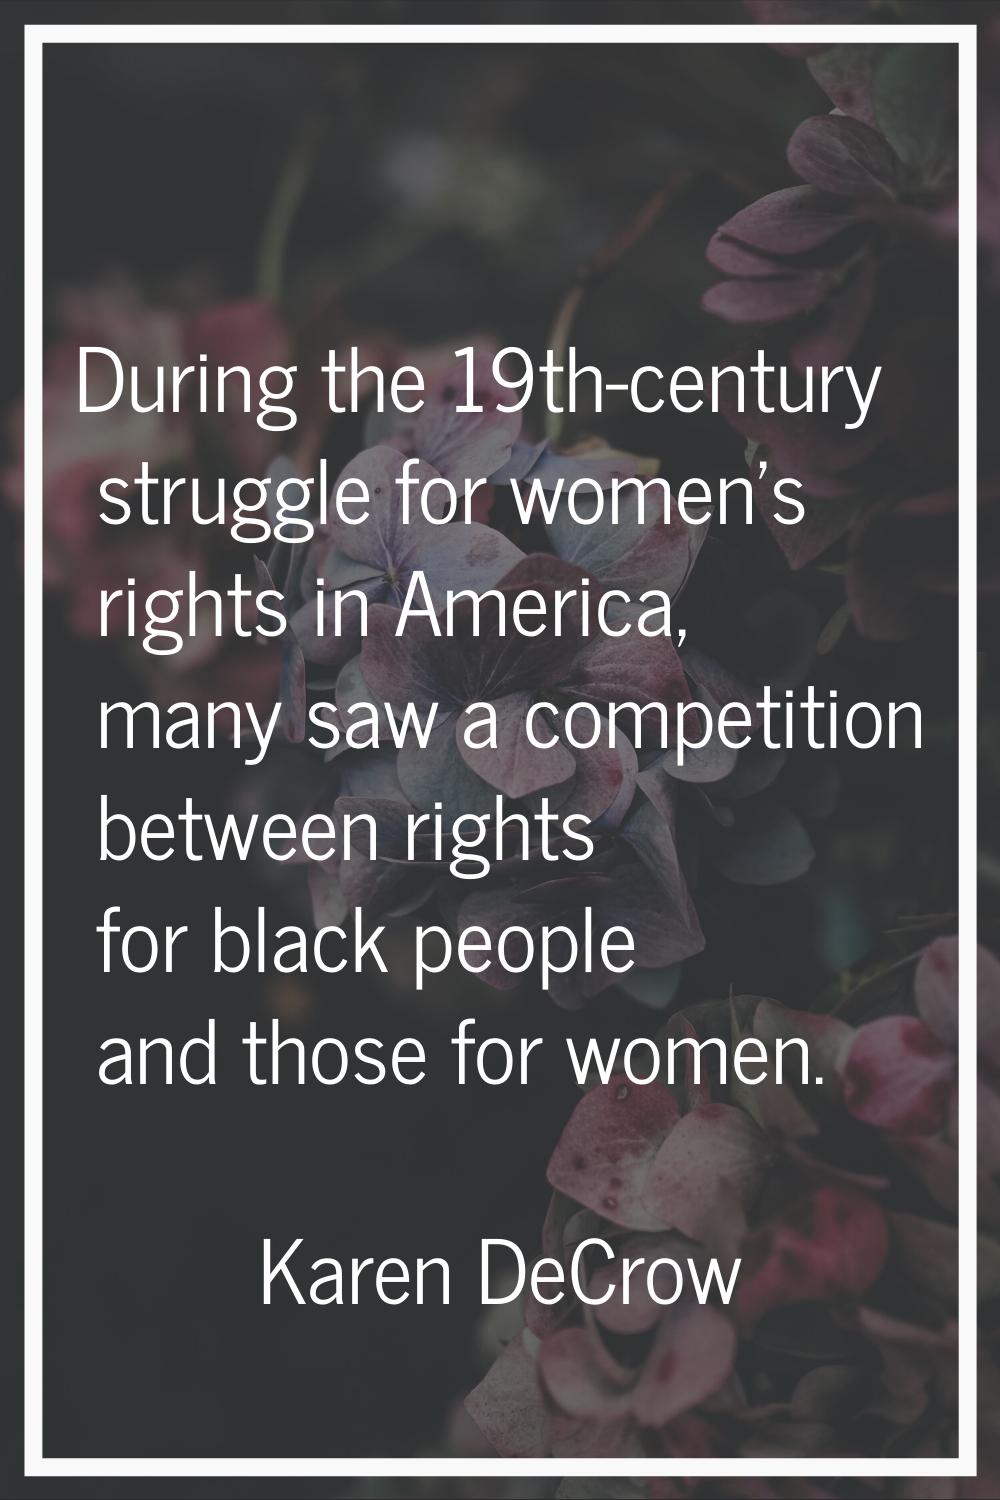 During the 19th-century struggle for women's rights in America, many saw a competition between righ